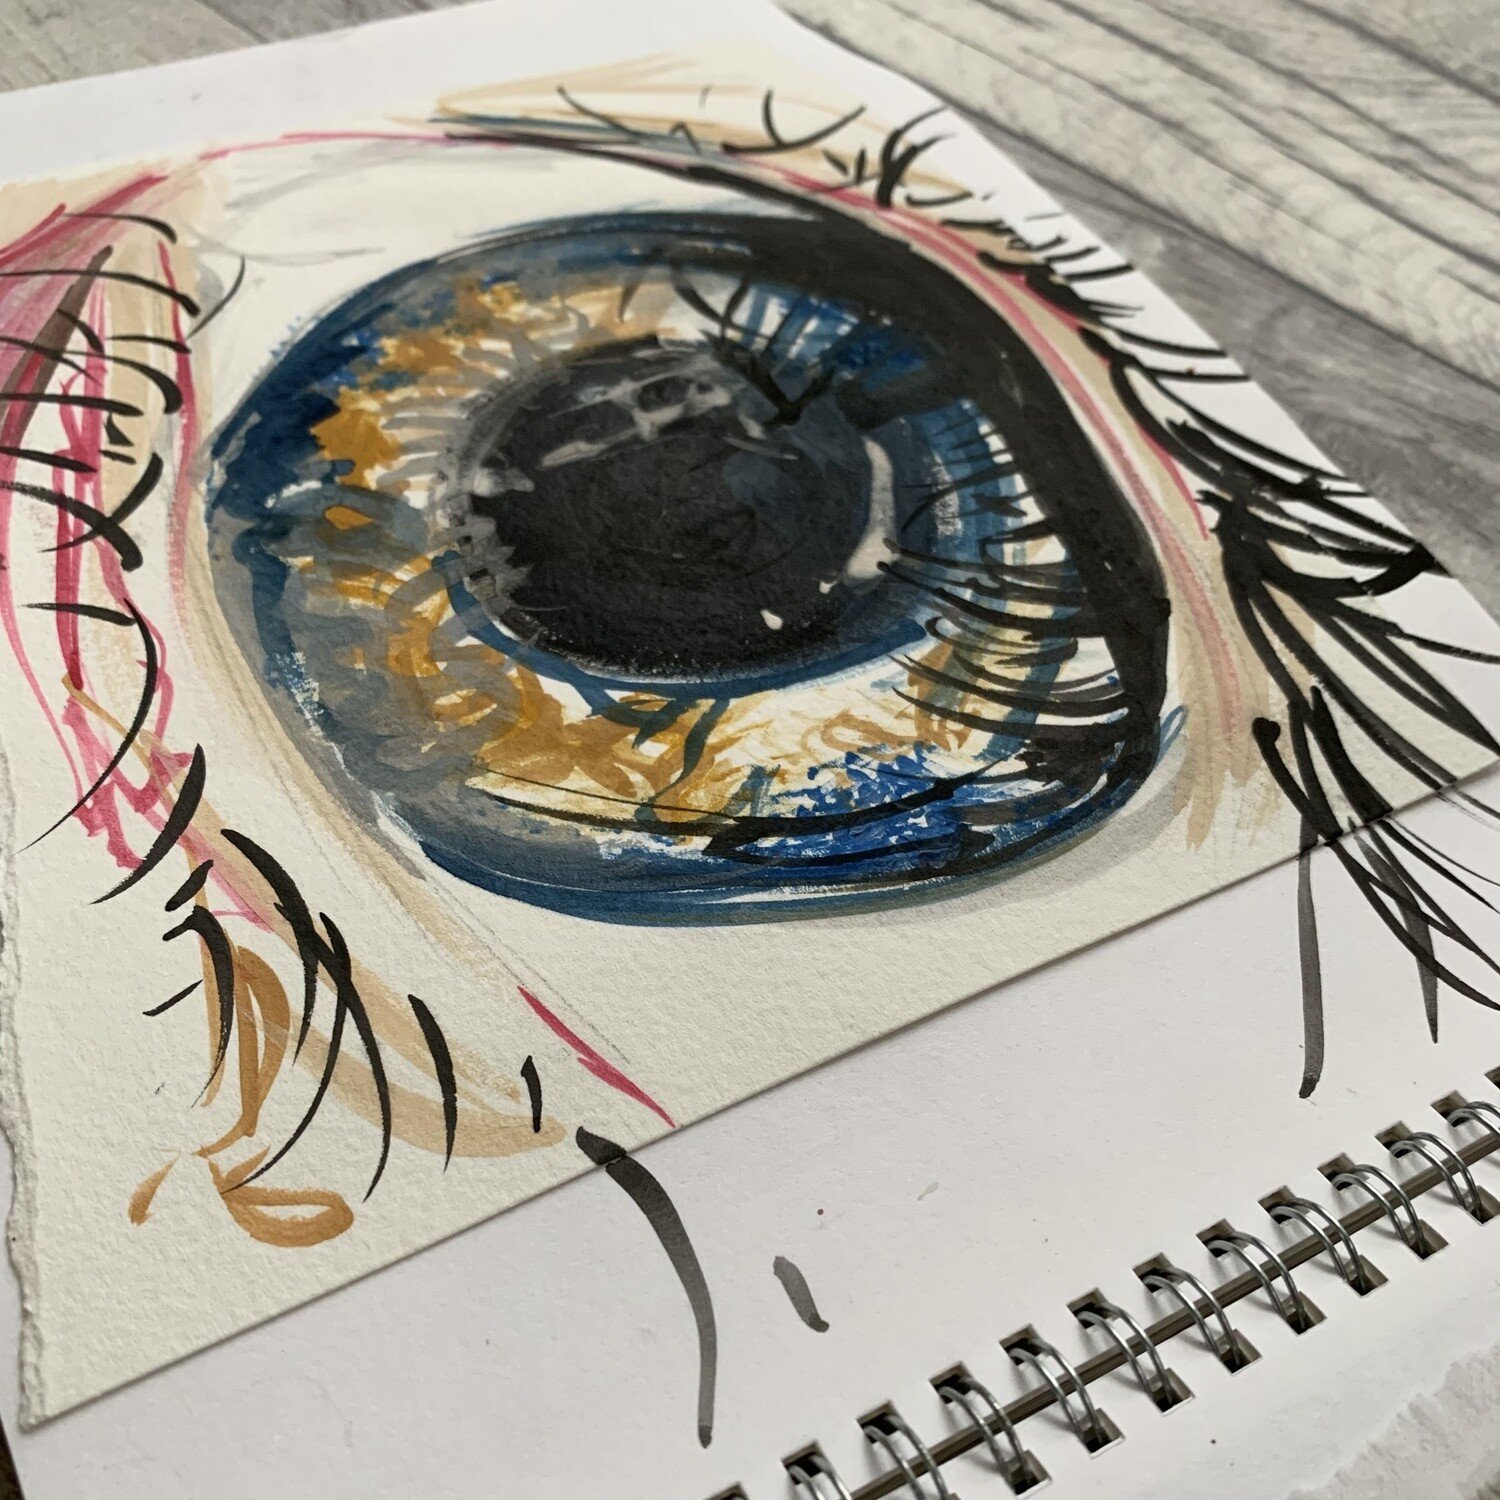 Sketchbook Workshop - One to One - 1 Day + 1 Session